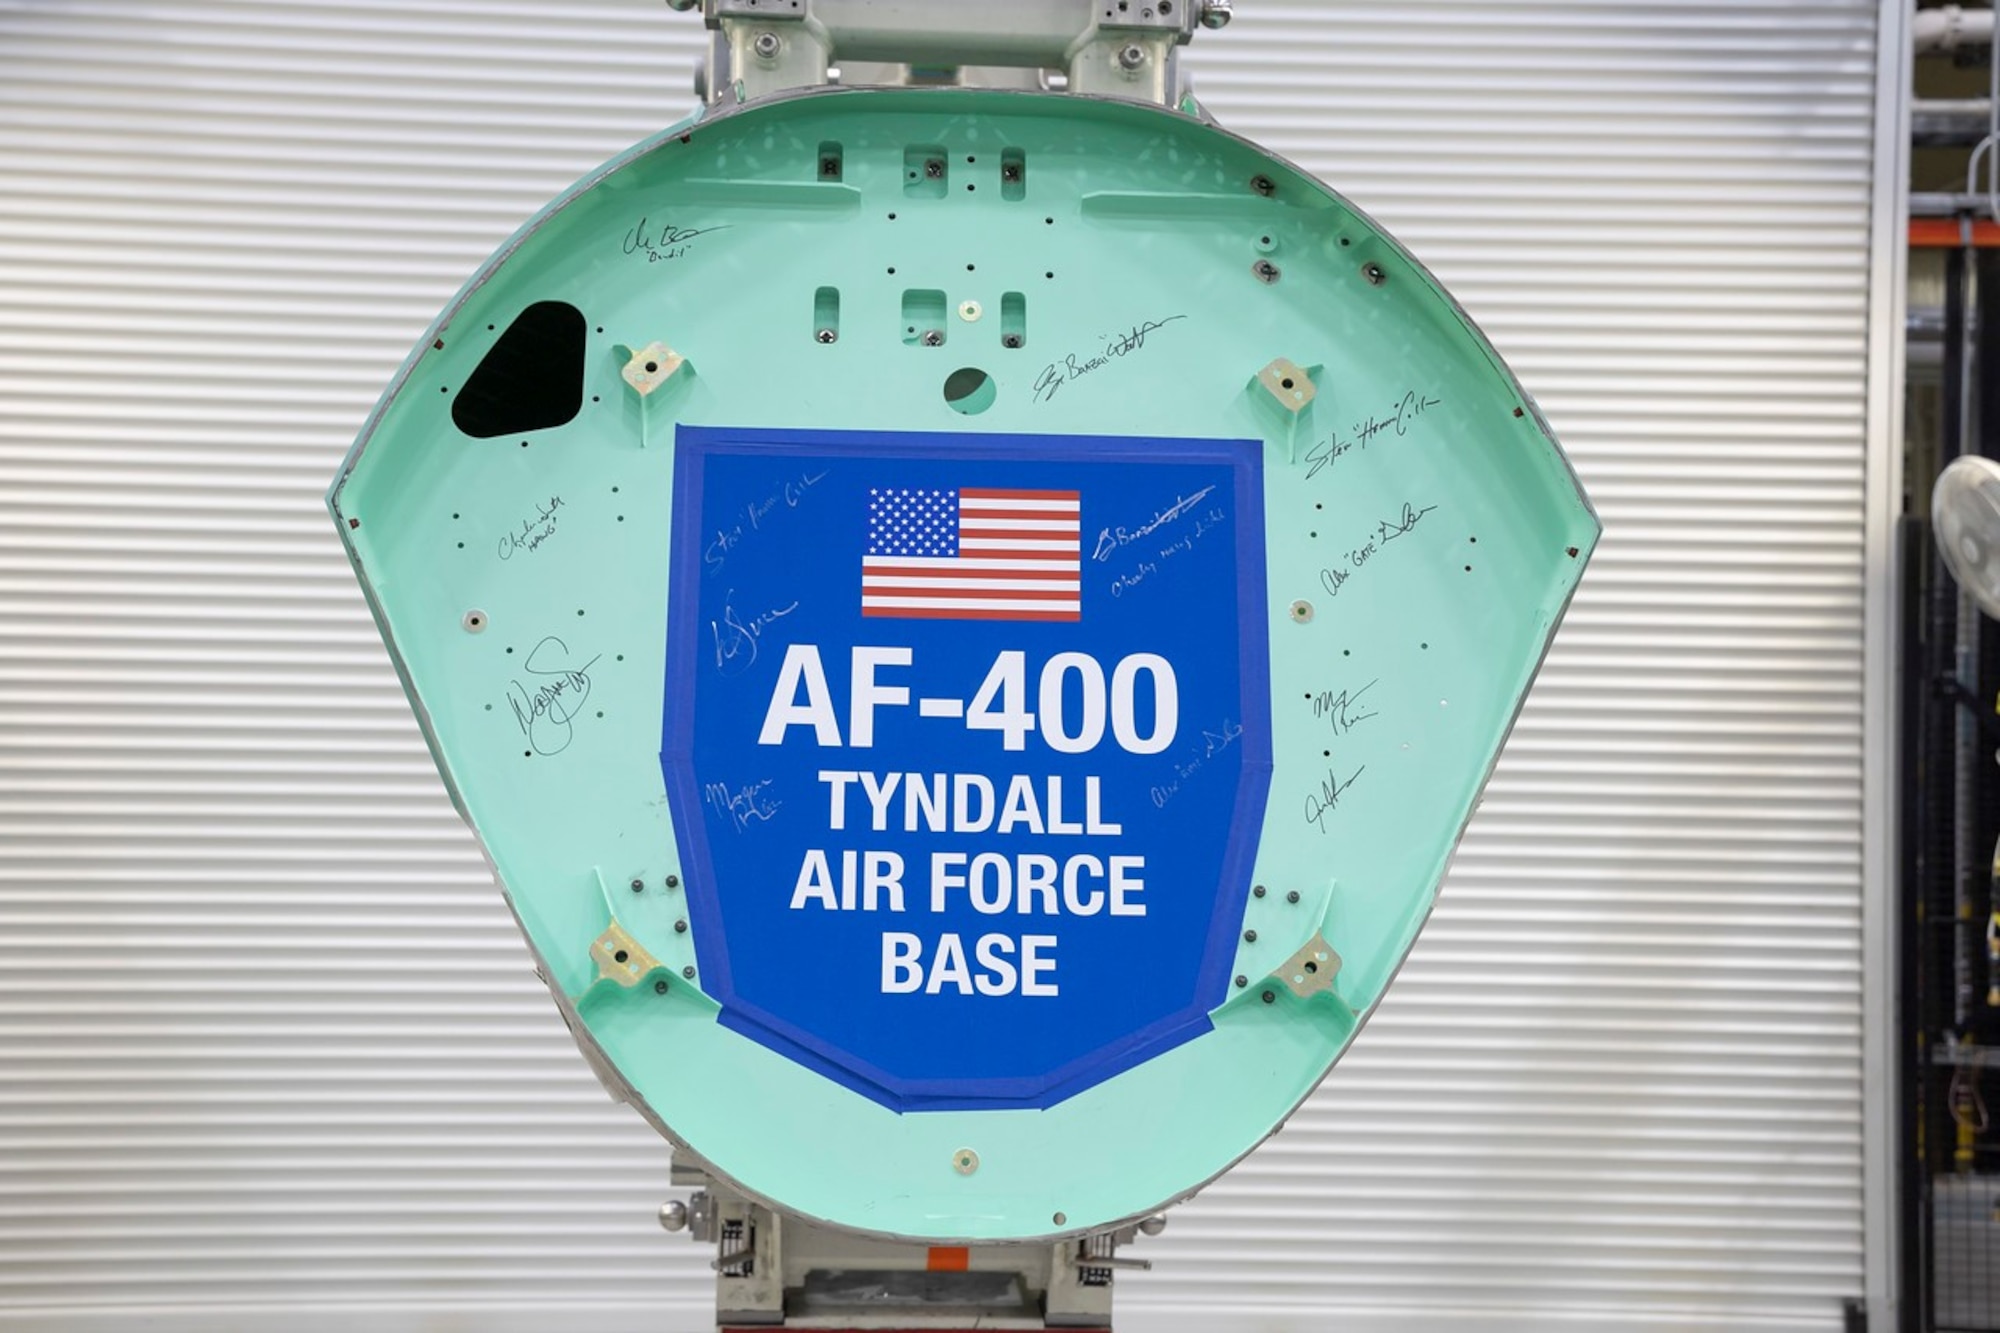 An F-35A Lightning II airframe structural component holds signatures of Airmen assigned to Tyndall Air Force Base, Florida, at the Lockheed Martin factory in Fort Worth, Texas, Oct. 20, 2022.